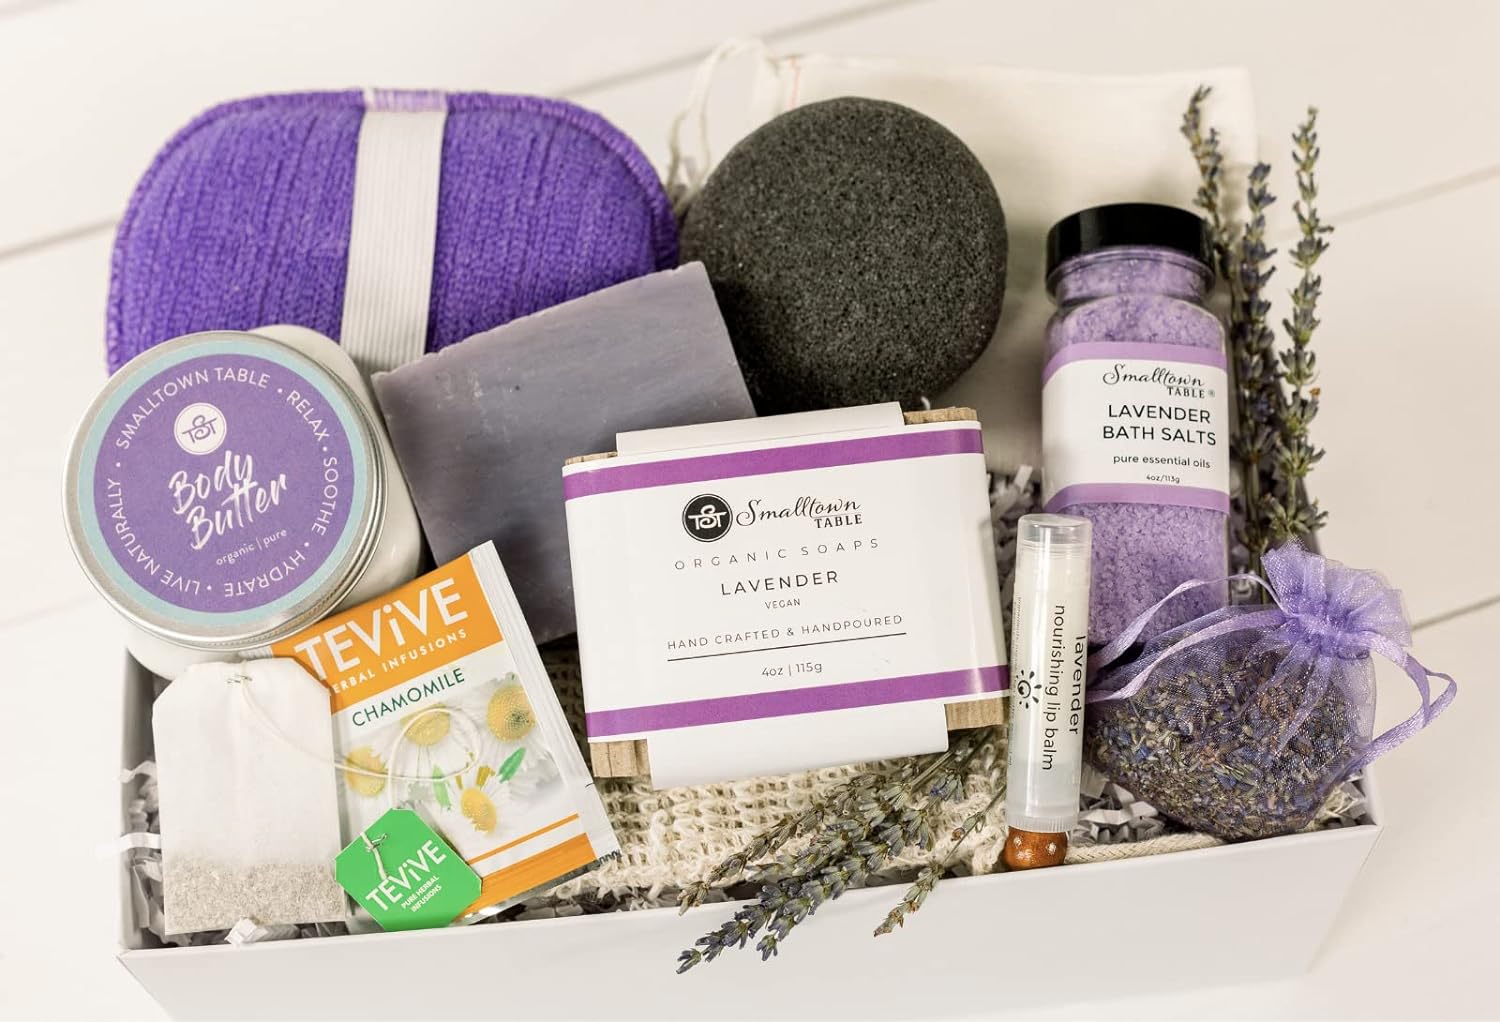 Relaxing Lavender Spa Box for Her - Self Care Relaxation Gifts, Spa Kit, Handmade Soap, Body Butter, Bath Salt Soak